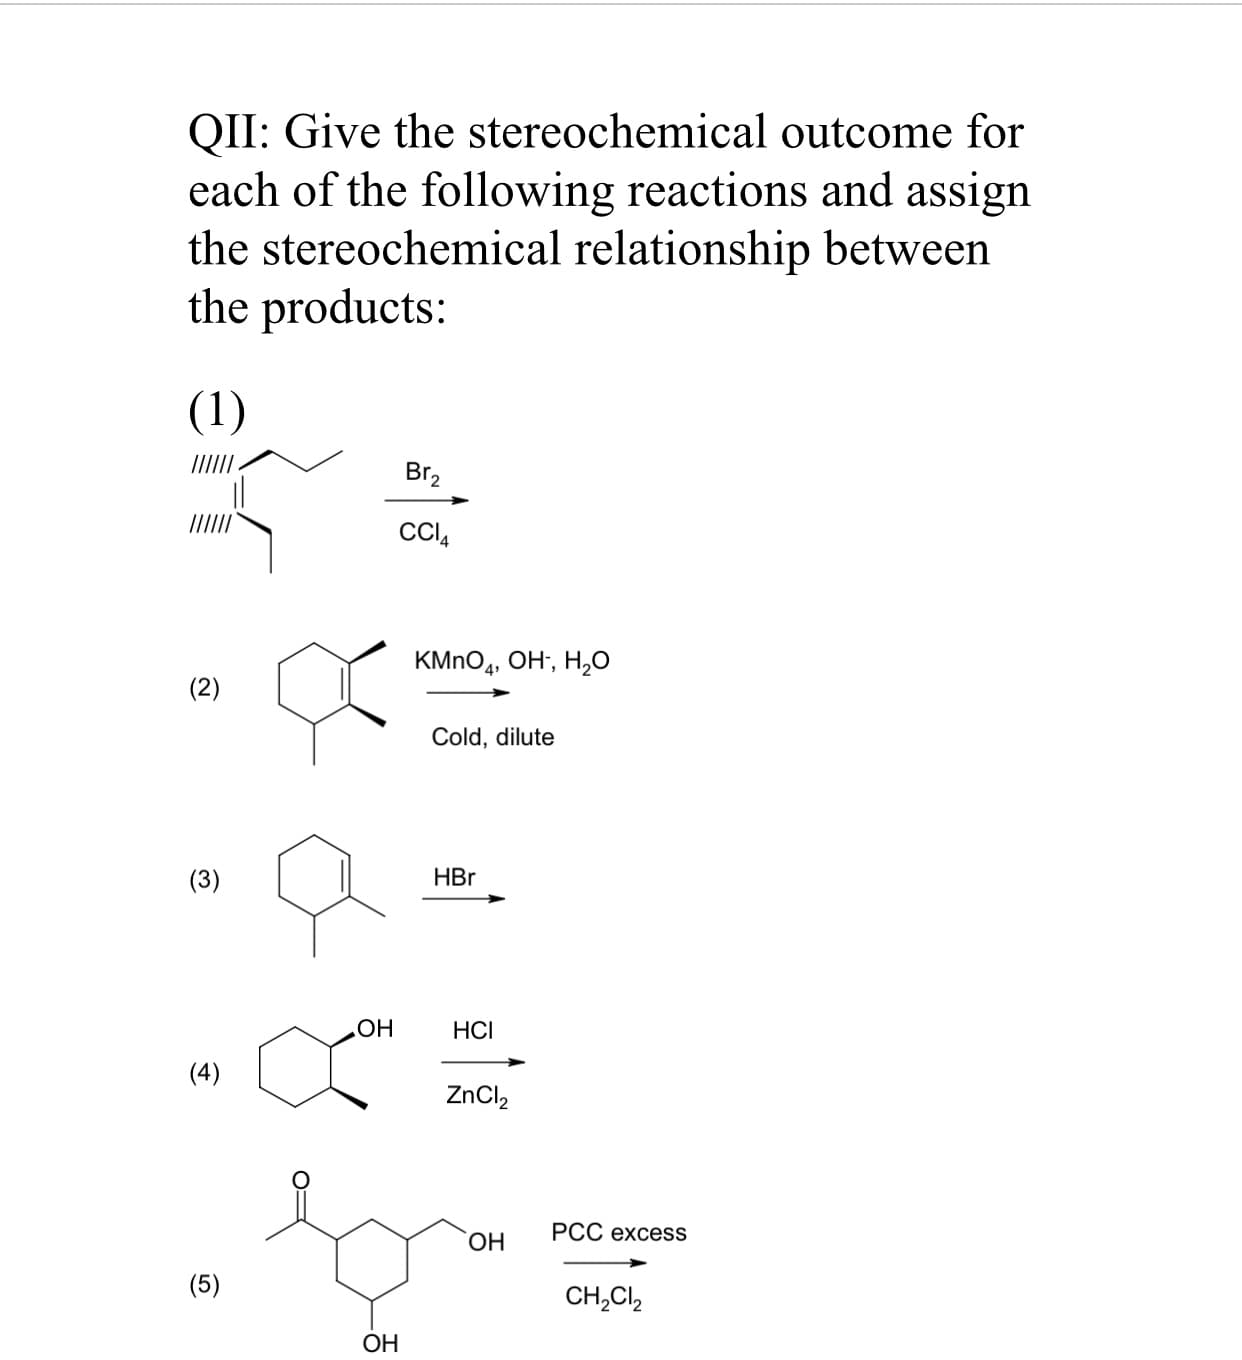 QII: Give the stereochemical outcome for
each of the following reactions and assign
the stereochemical relationship between
the products:
(1)
Br2
CCI,
KMNO4, OH, H,0
(2)
Cold, dilute
(3)
HBr
ОН
НСI
(4)
ZnCl,
PCC excess
ОН
(5)
CH,Cl,
ОН
